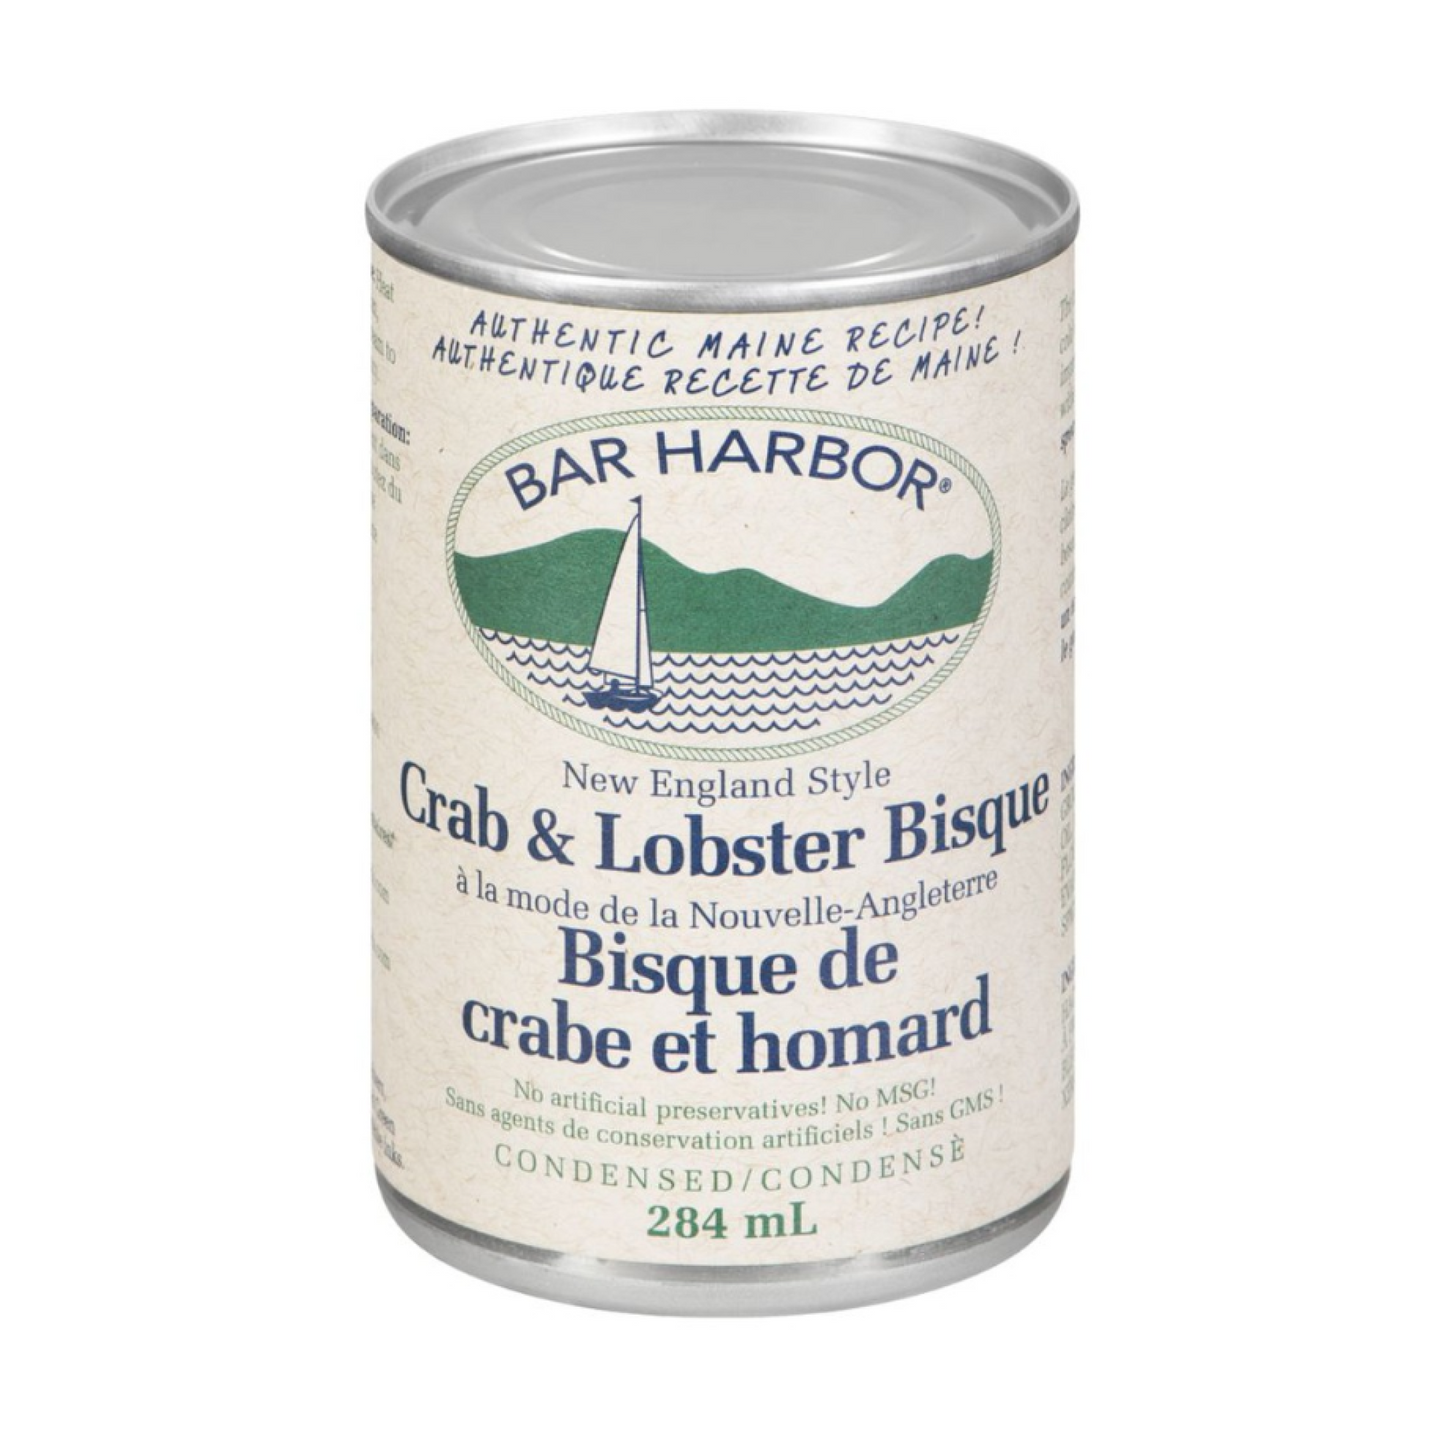 Bar Harbor New England Style Crab and Lobster Bisque 284ml